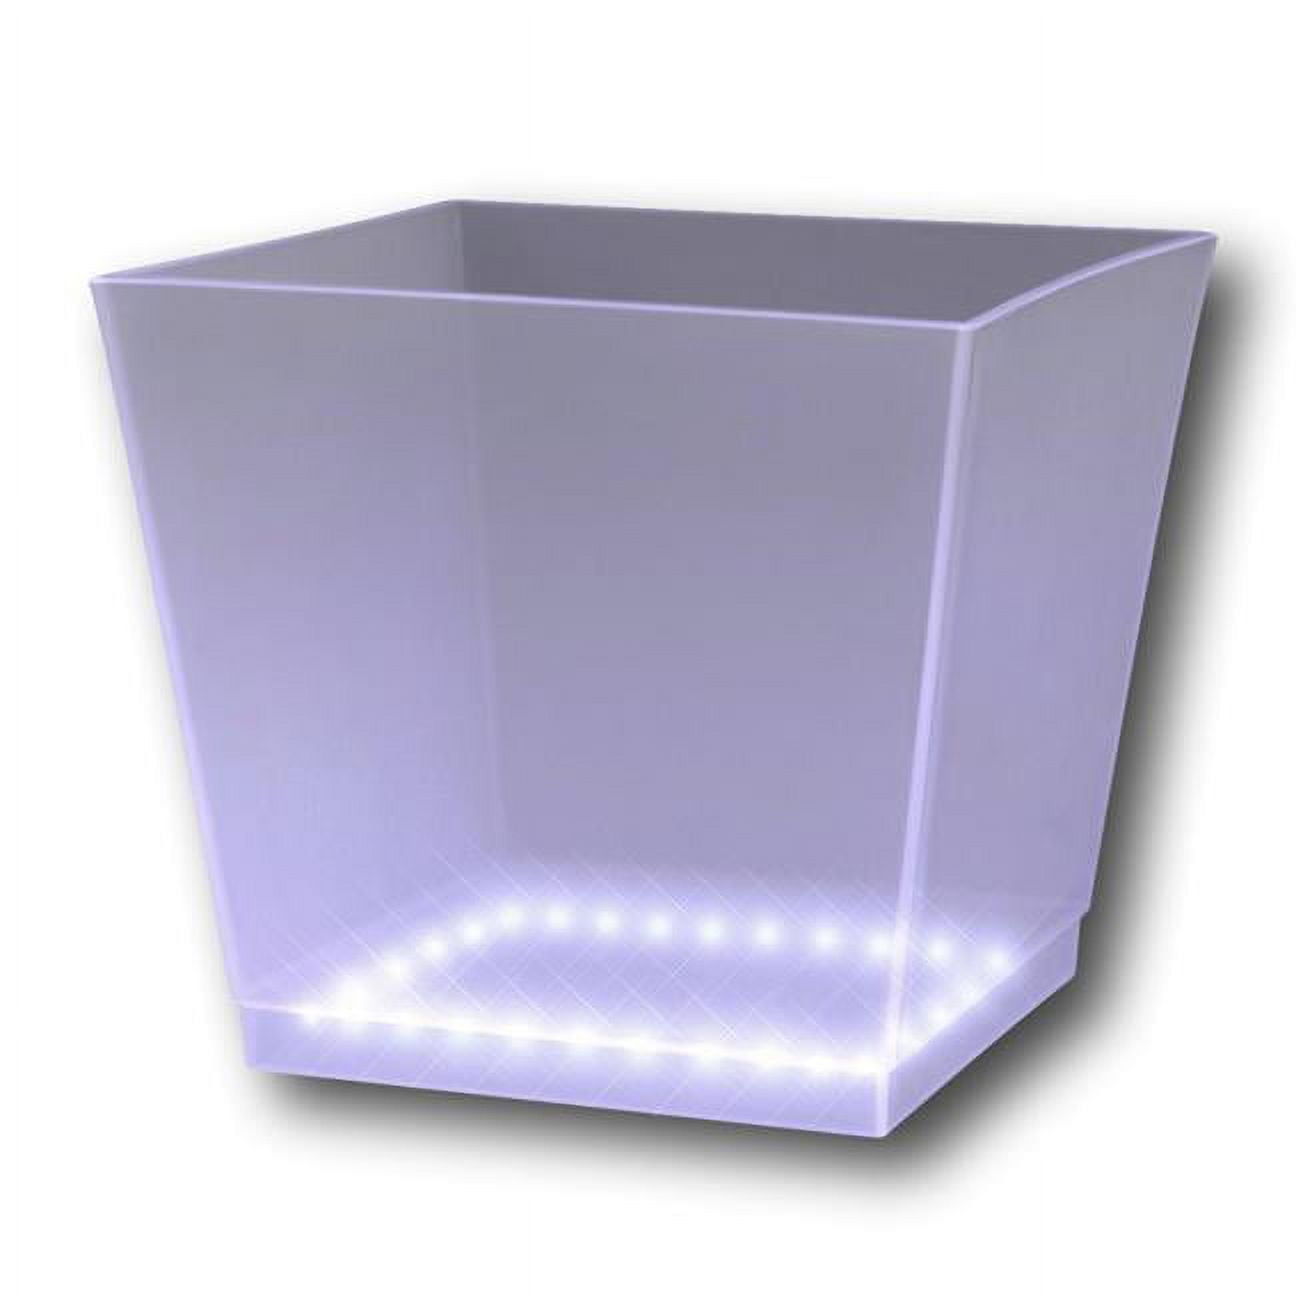 Luccib-wt Light Up Chilled Cube Ice Bucket, White